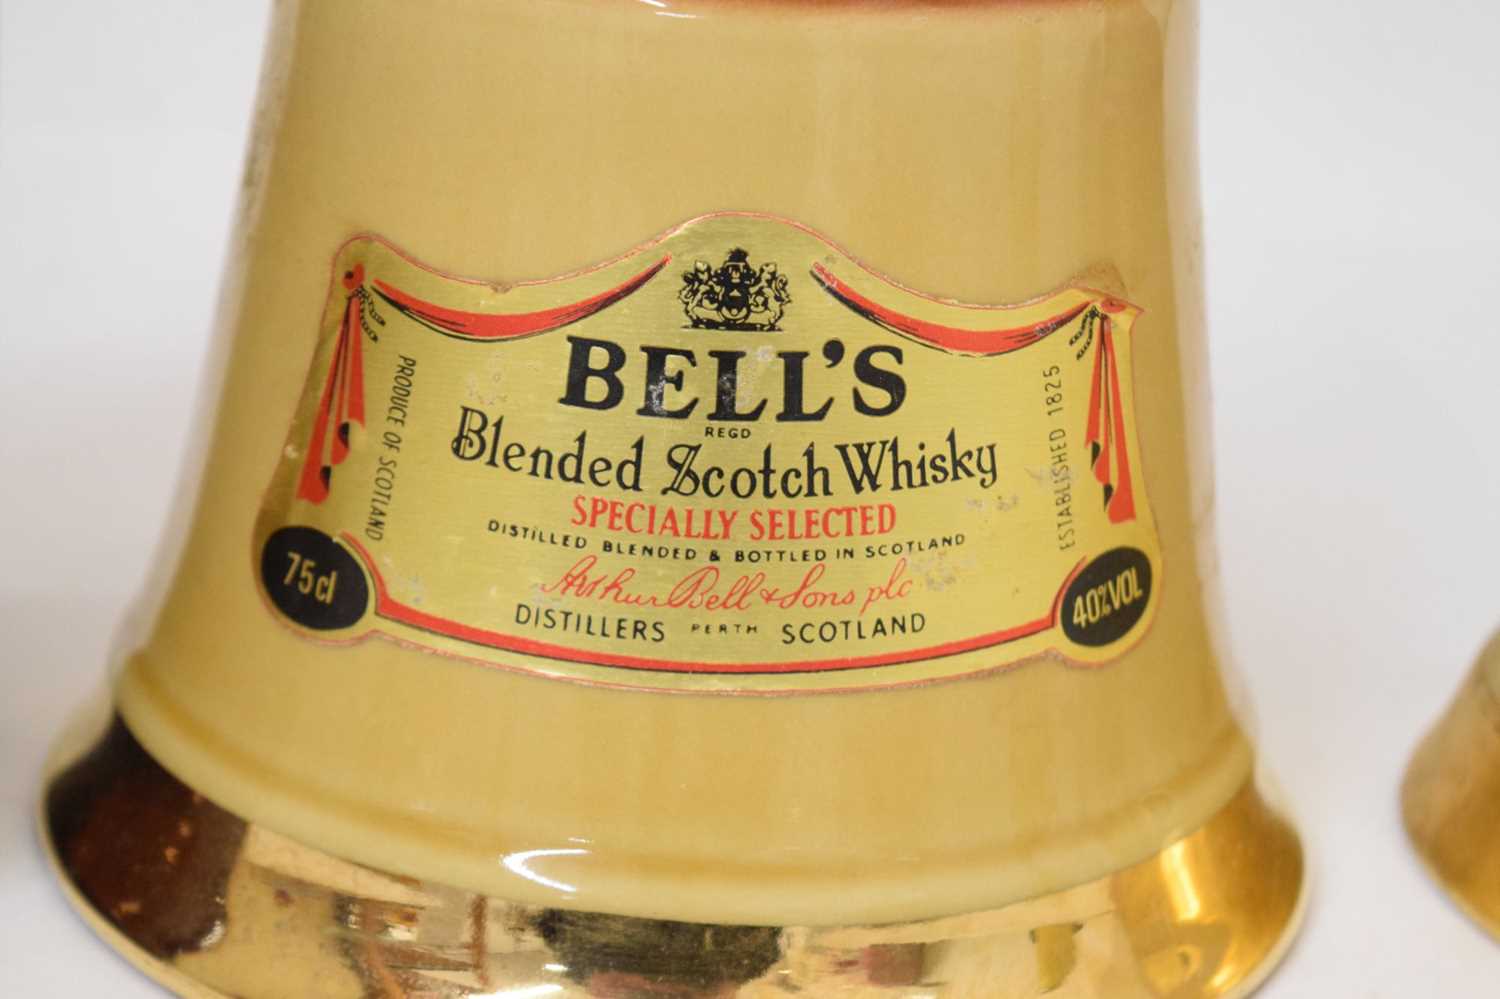 Bells Royal VAT De Luxe whisky, and Bells Whisky - Image 3 of 5